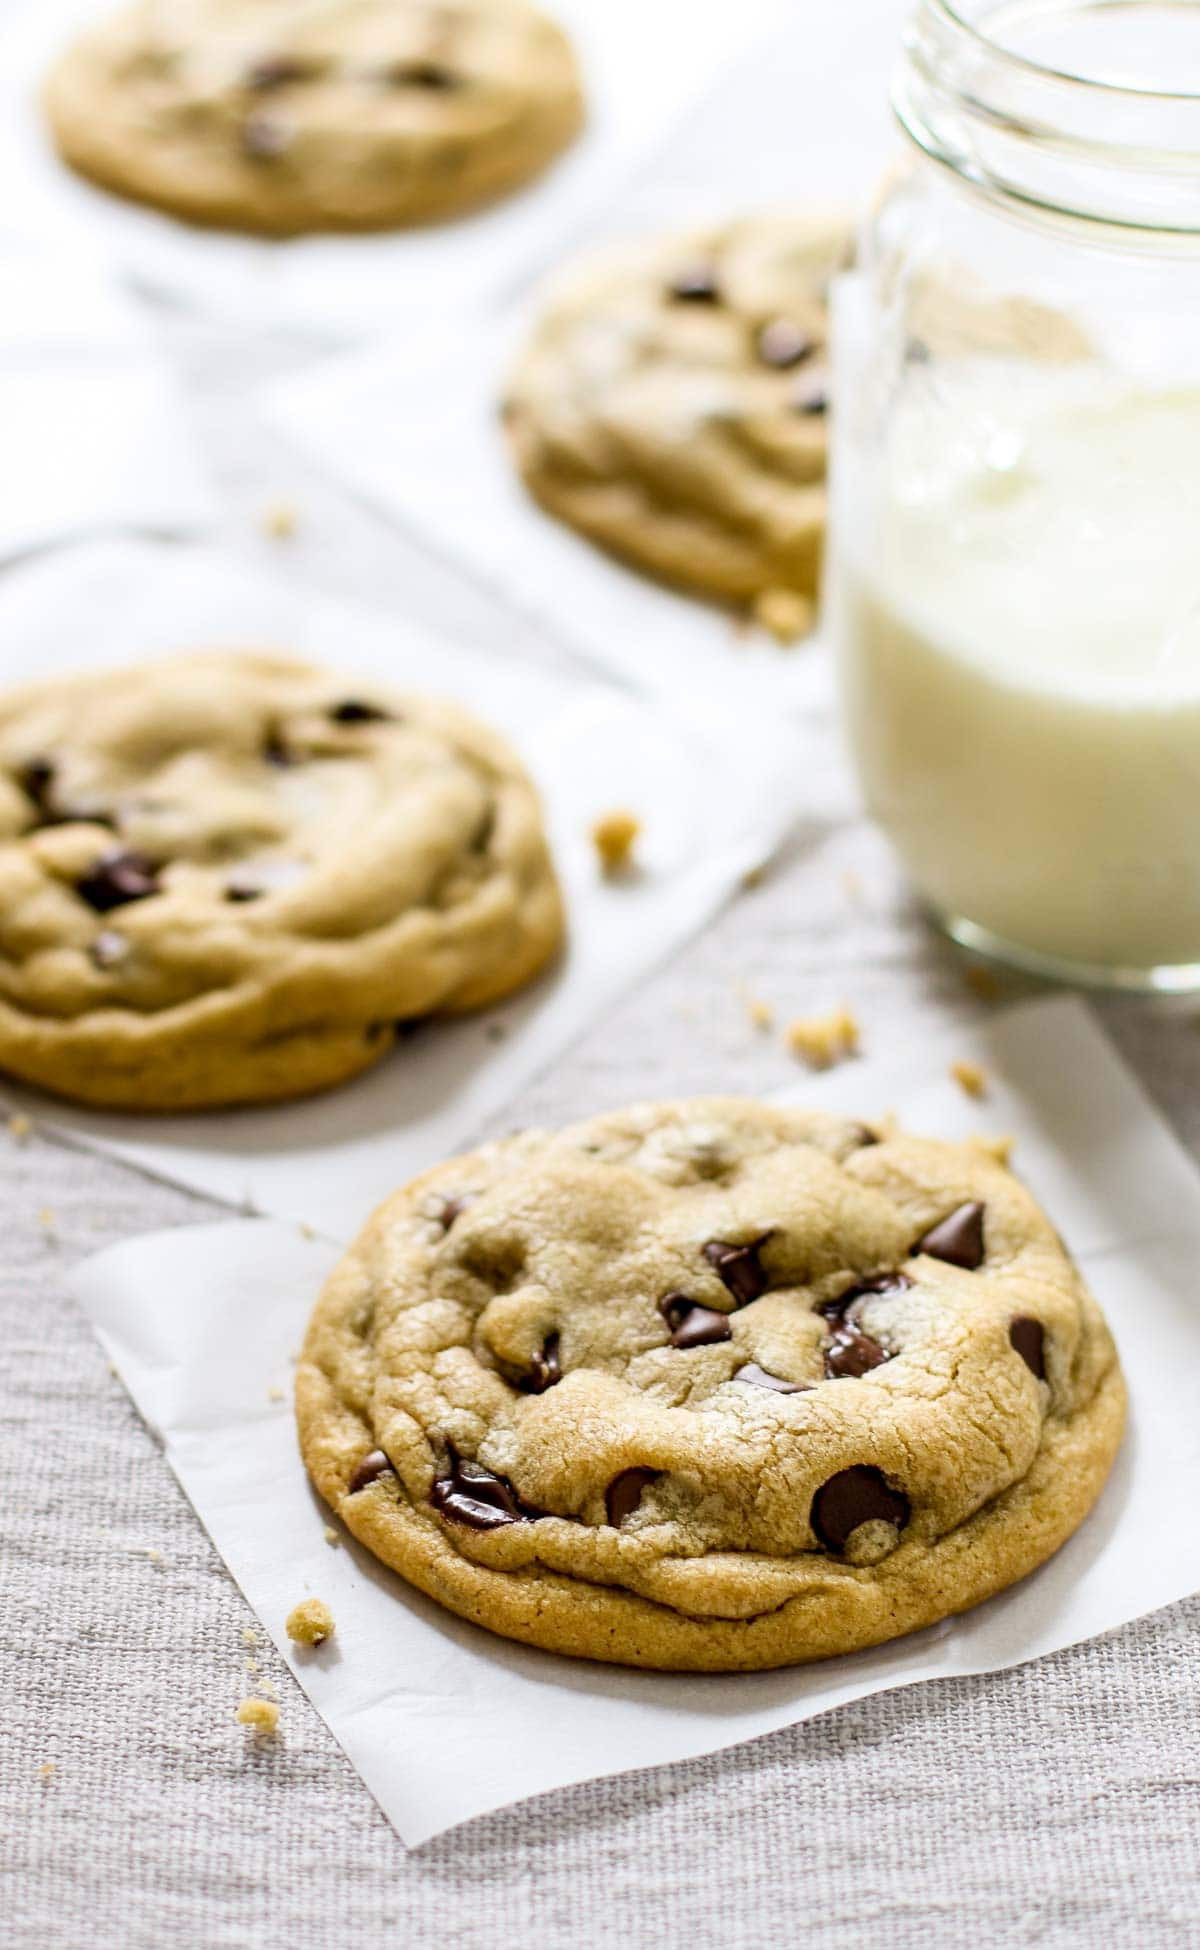 Soft Chewy Choc Chip Cookies Recipe
 The Best Soft Chocolate Chip Cookies Recipe Pinch of Yum